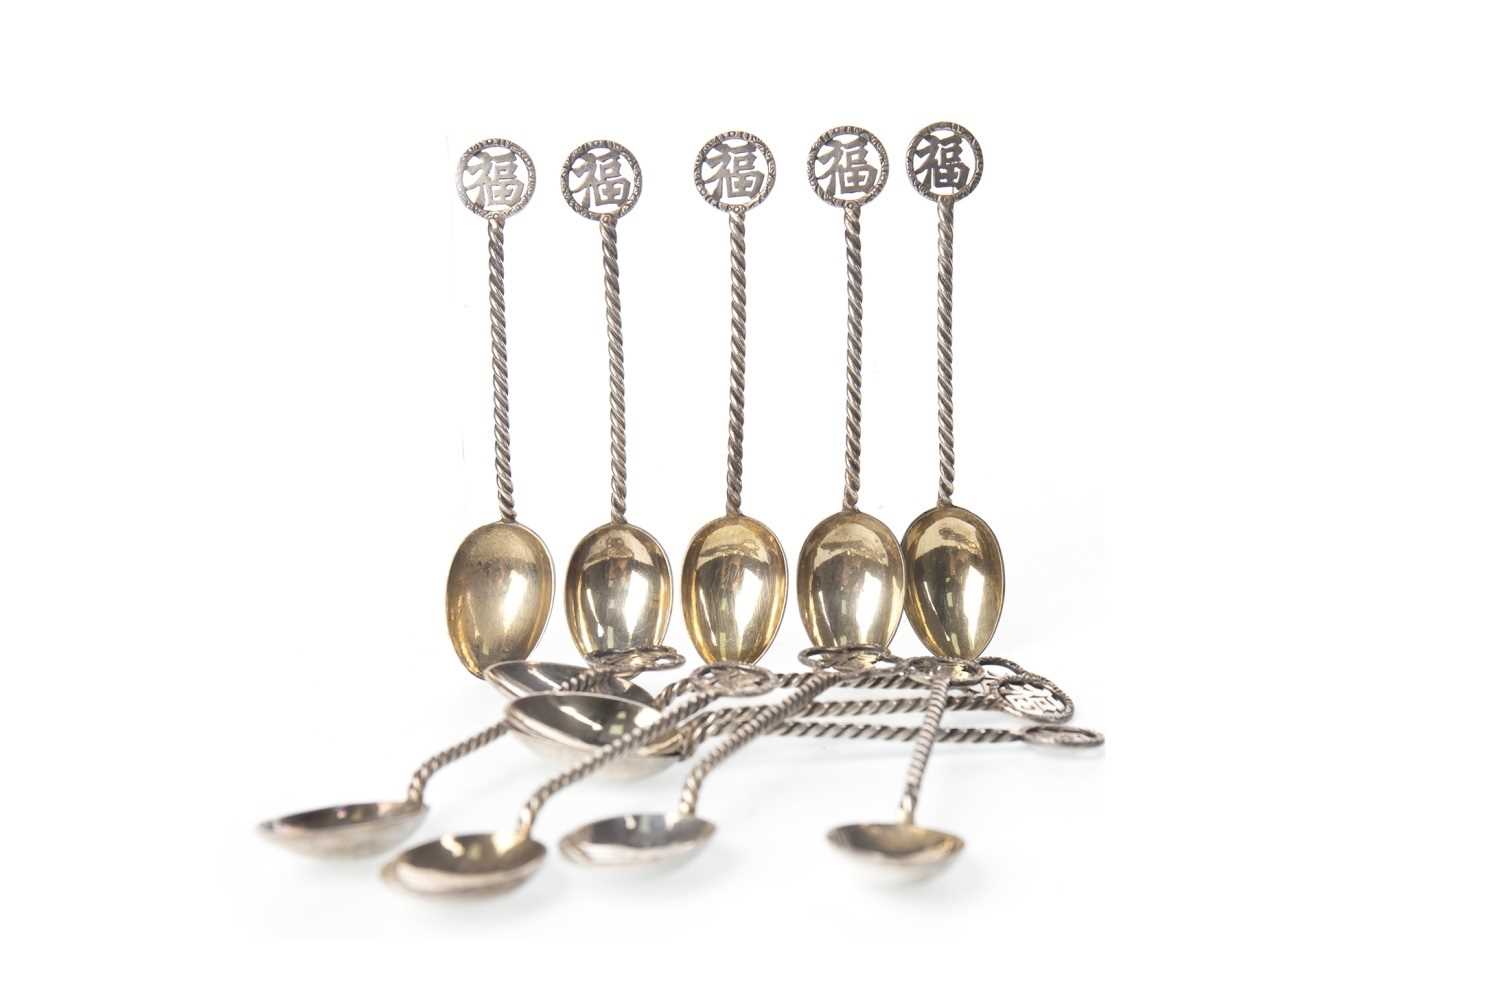 Lot 1016 - A SET OF TWELVE EARLY 20TH CENTURY CHINESE SILVER TEA SPOONS